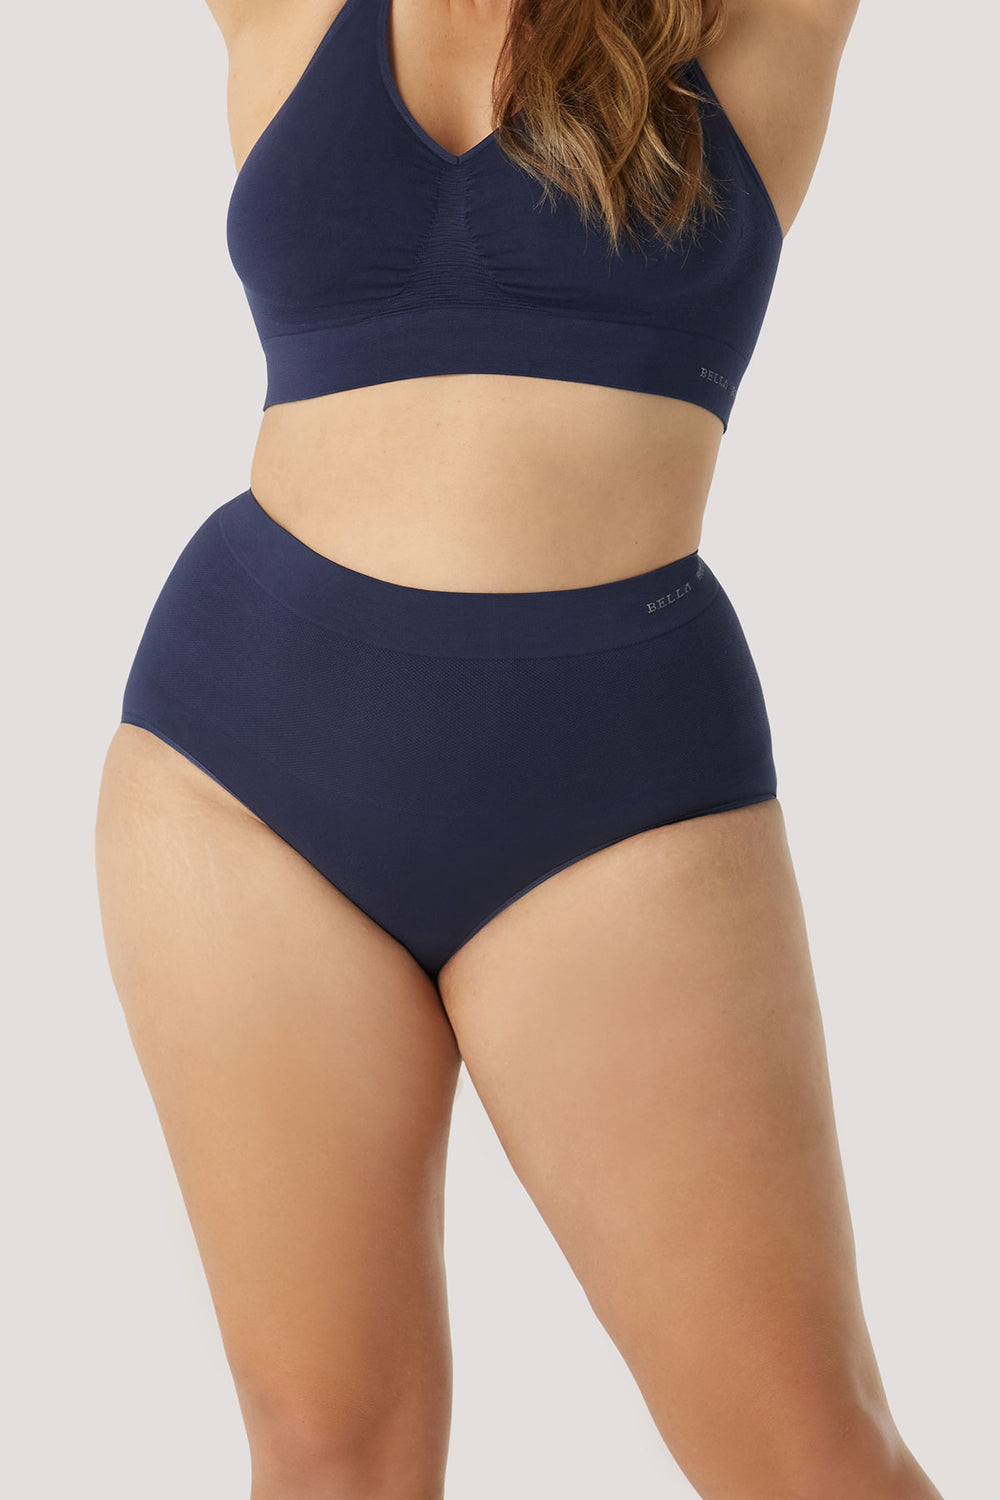 Women's breathable bamboo high waist control and firming underwear | Bella Bodies Australia | Midnight | Front